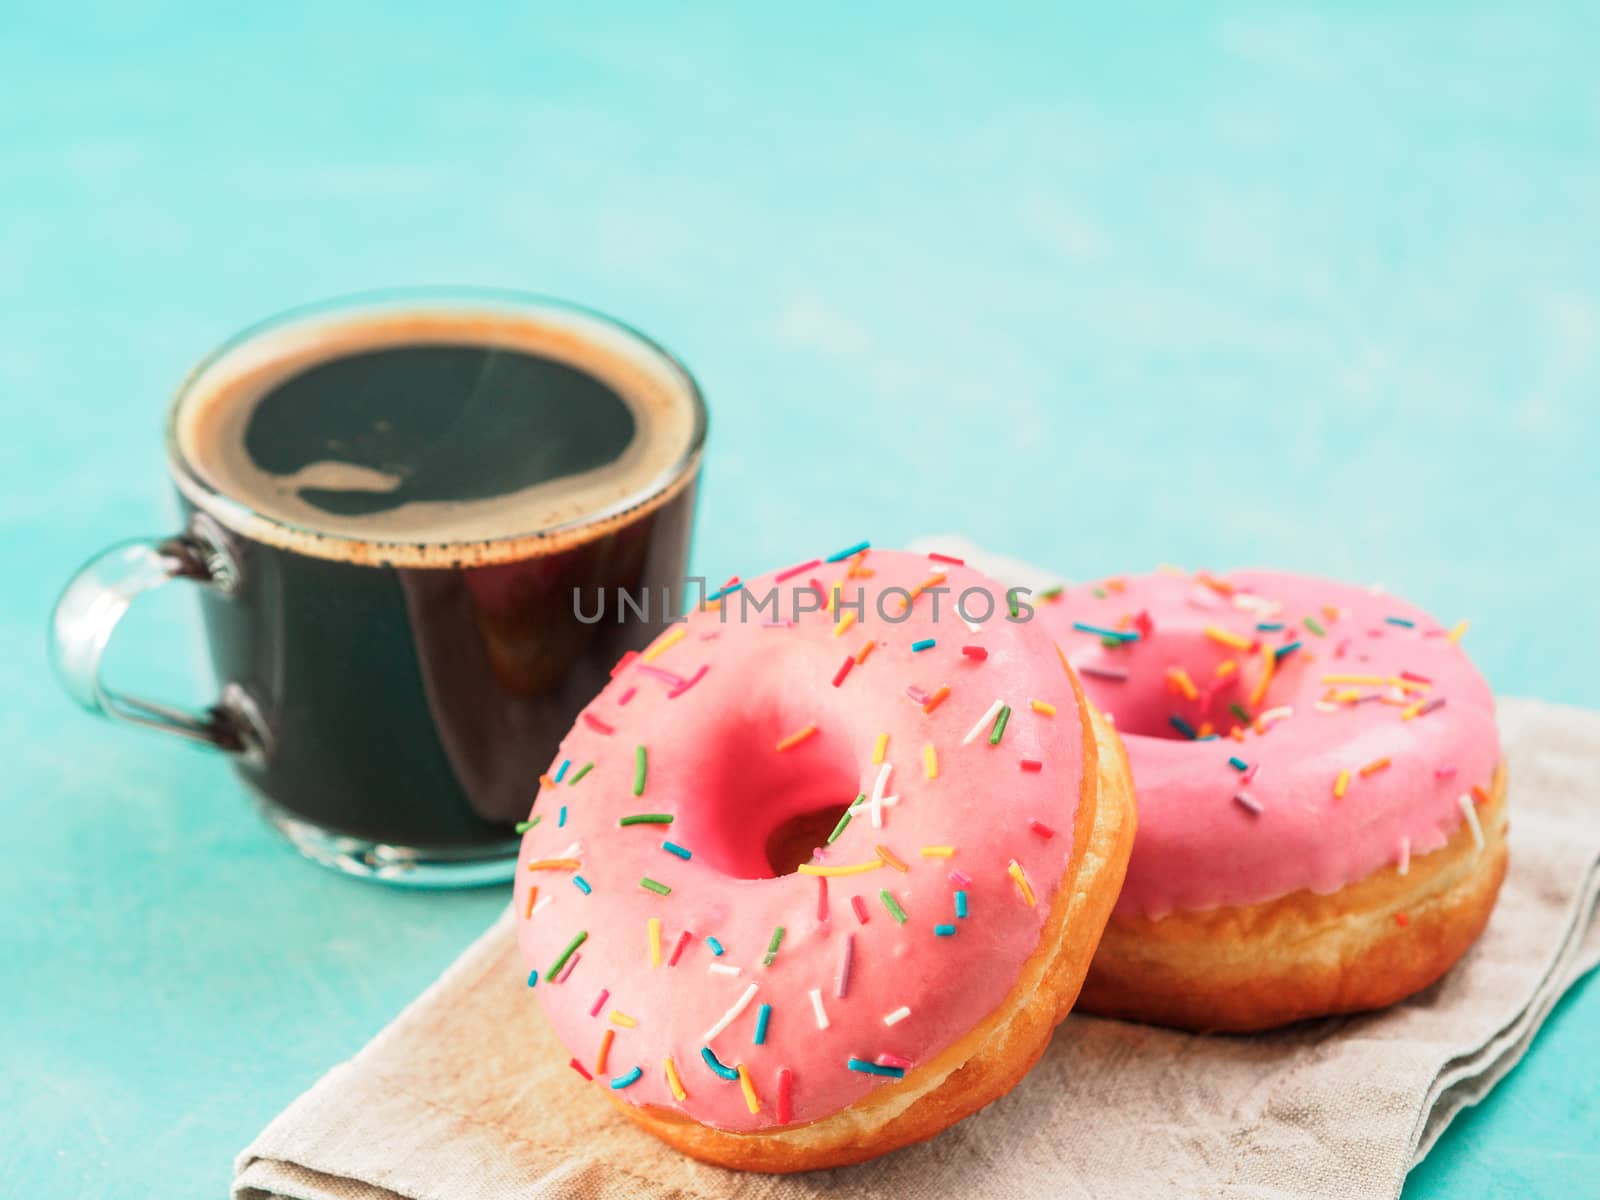 Two pink donuts and coffee on blue concrete background with copy space. Colorful donuts and coffee cup with copyspace. Glazed doughnuts with sprinkles